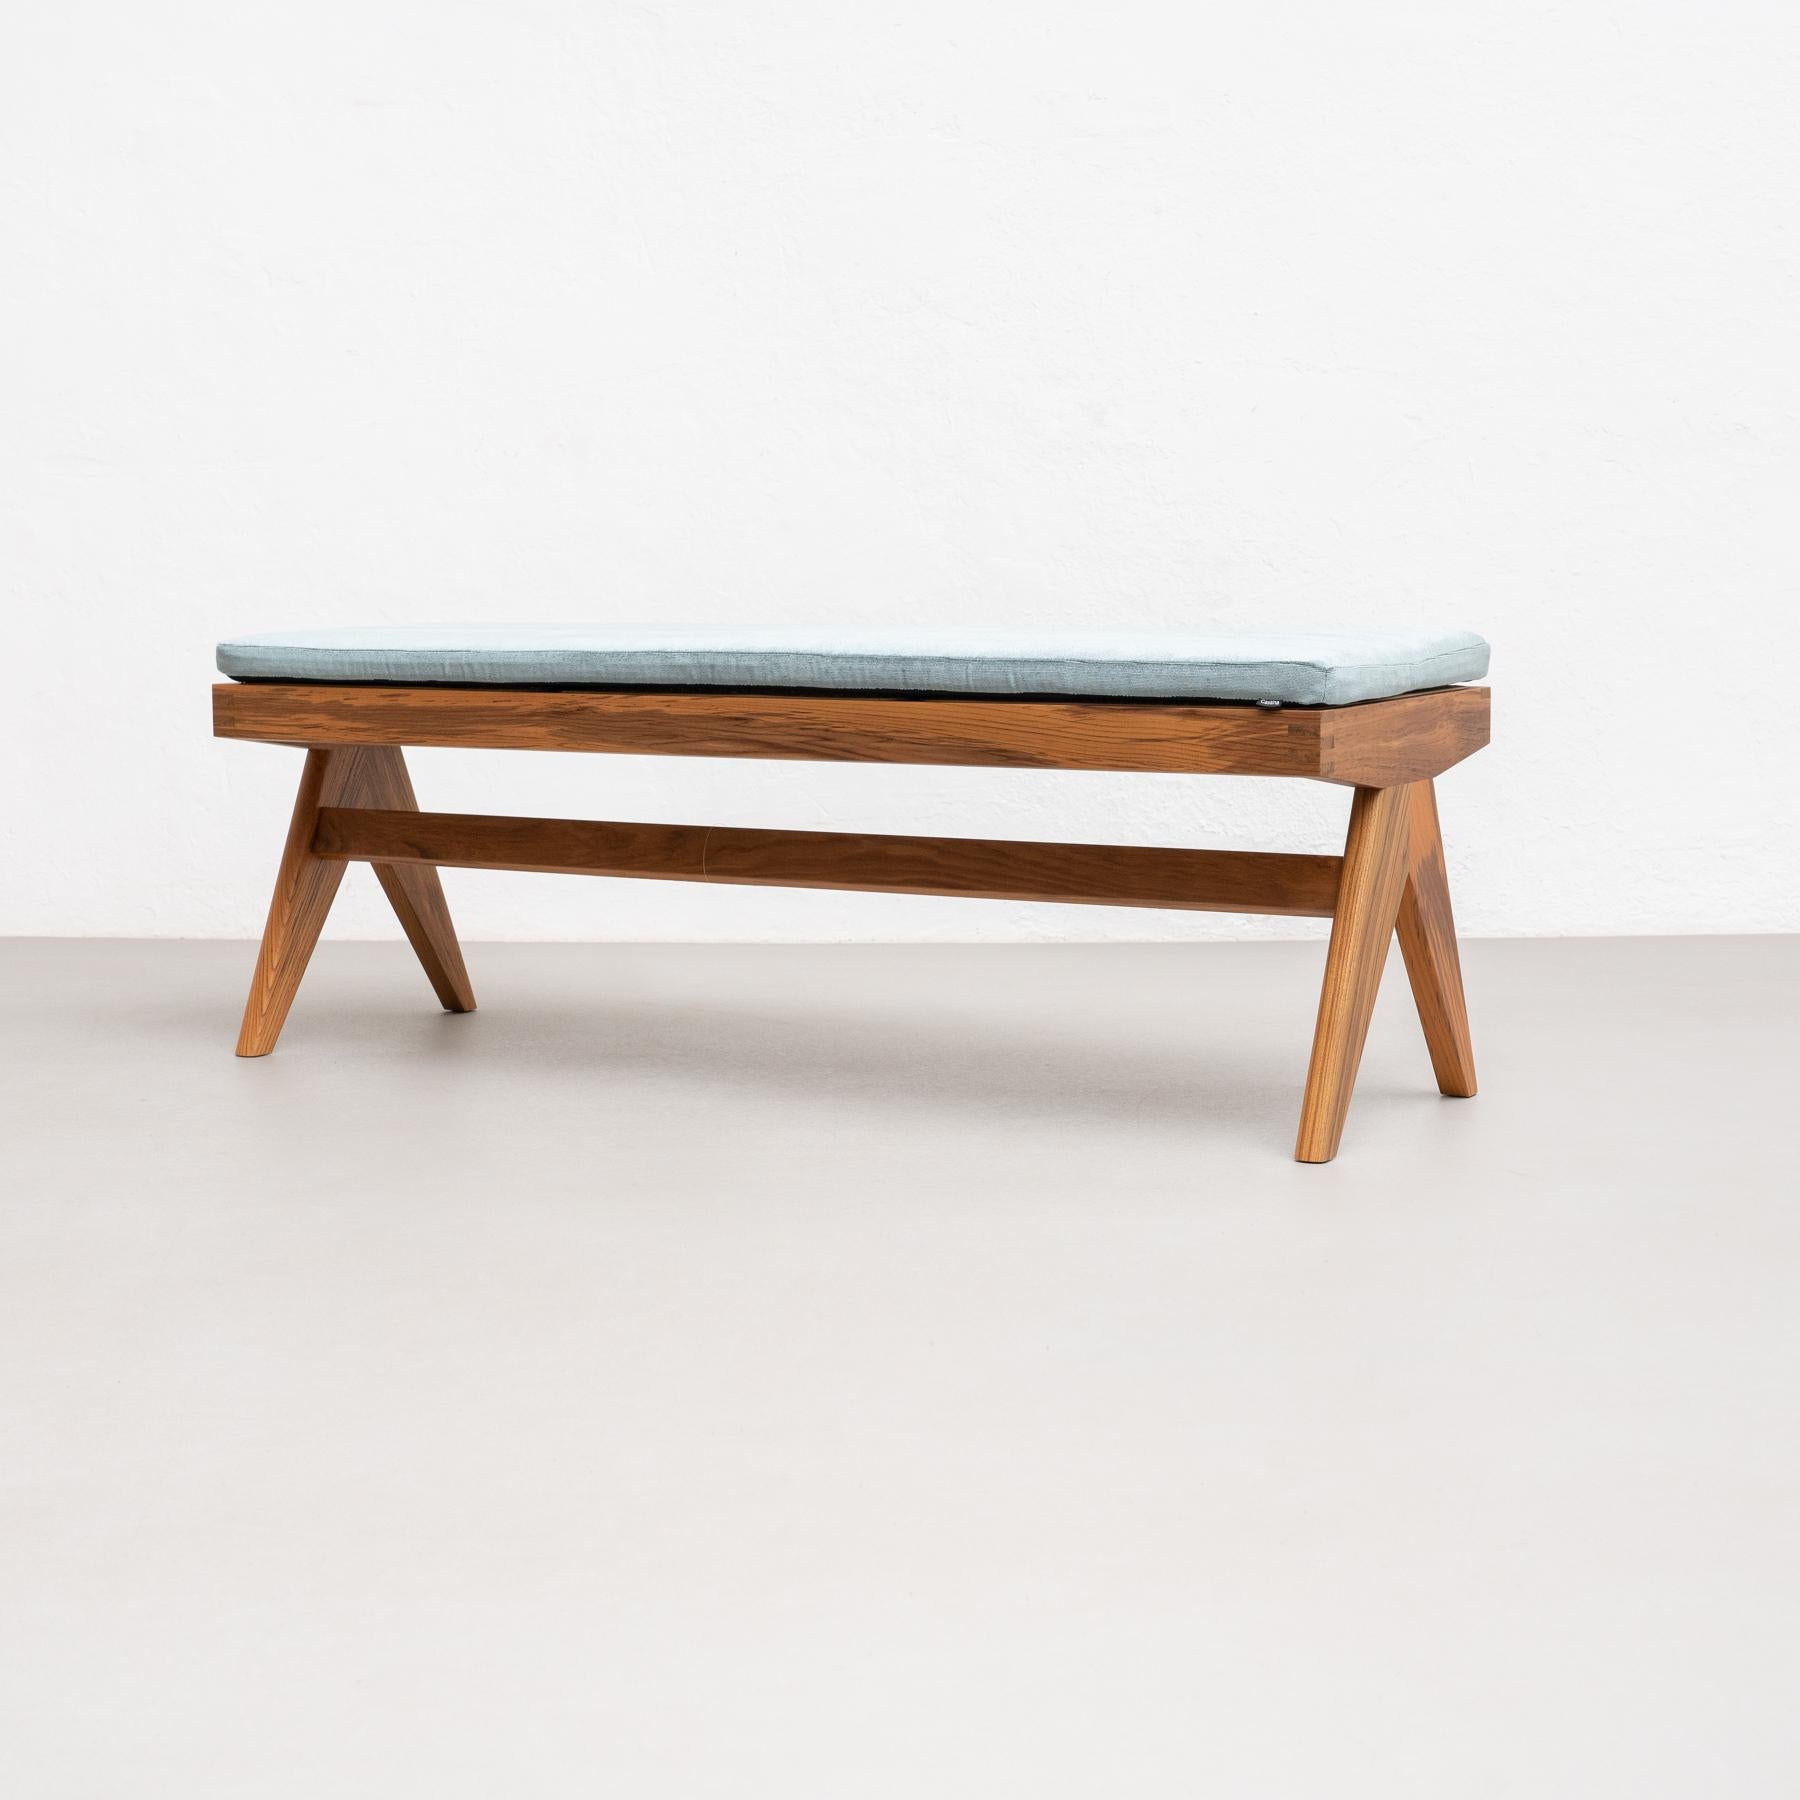 Bench designed by Pierre Jeanneret circa 1955, relaunched in 2020.
Manufactured by Cassina in Italy.

Cassina continues its study of the furniture of the city of Chandigarh and adds the Civil Bench to the Hommage à Pierre Jeanneret Collection; a